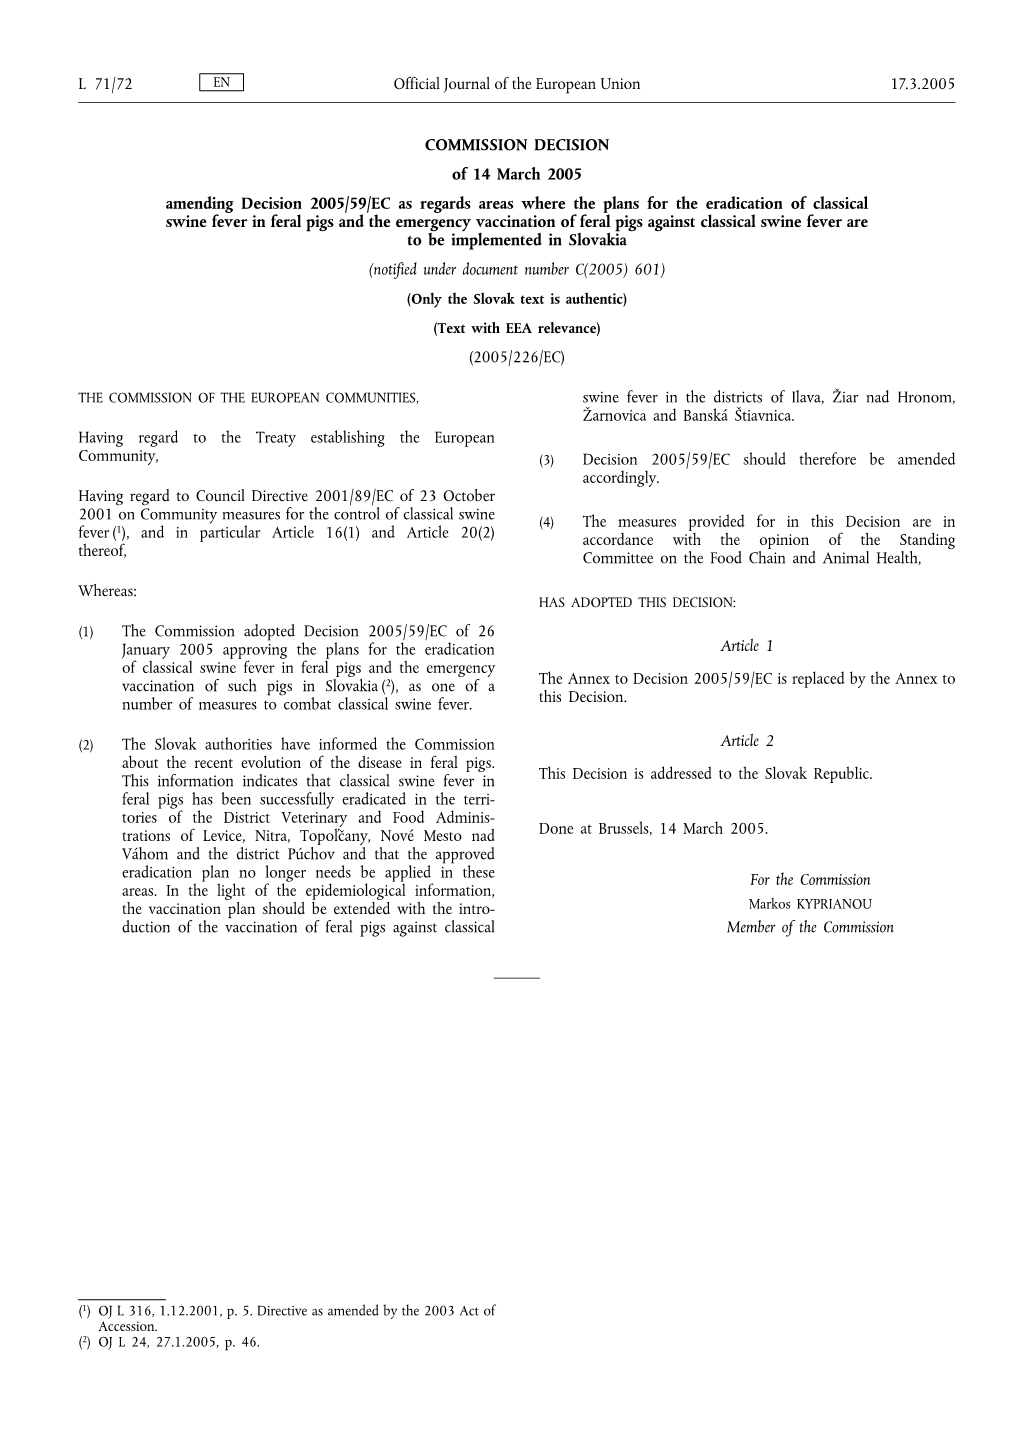 COMMISSION DECISION of 14 March 2005 Amending